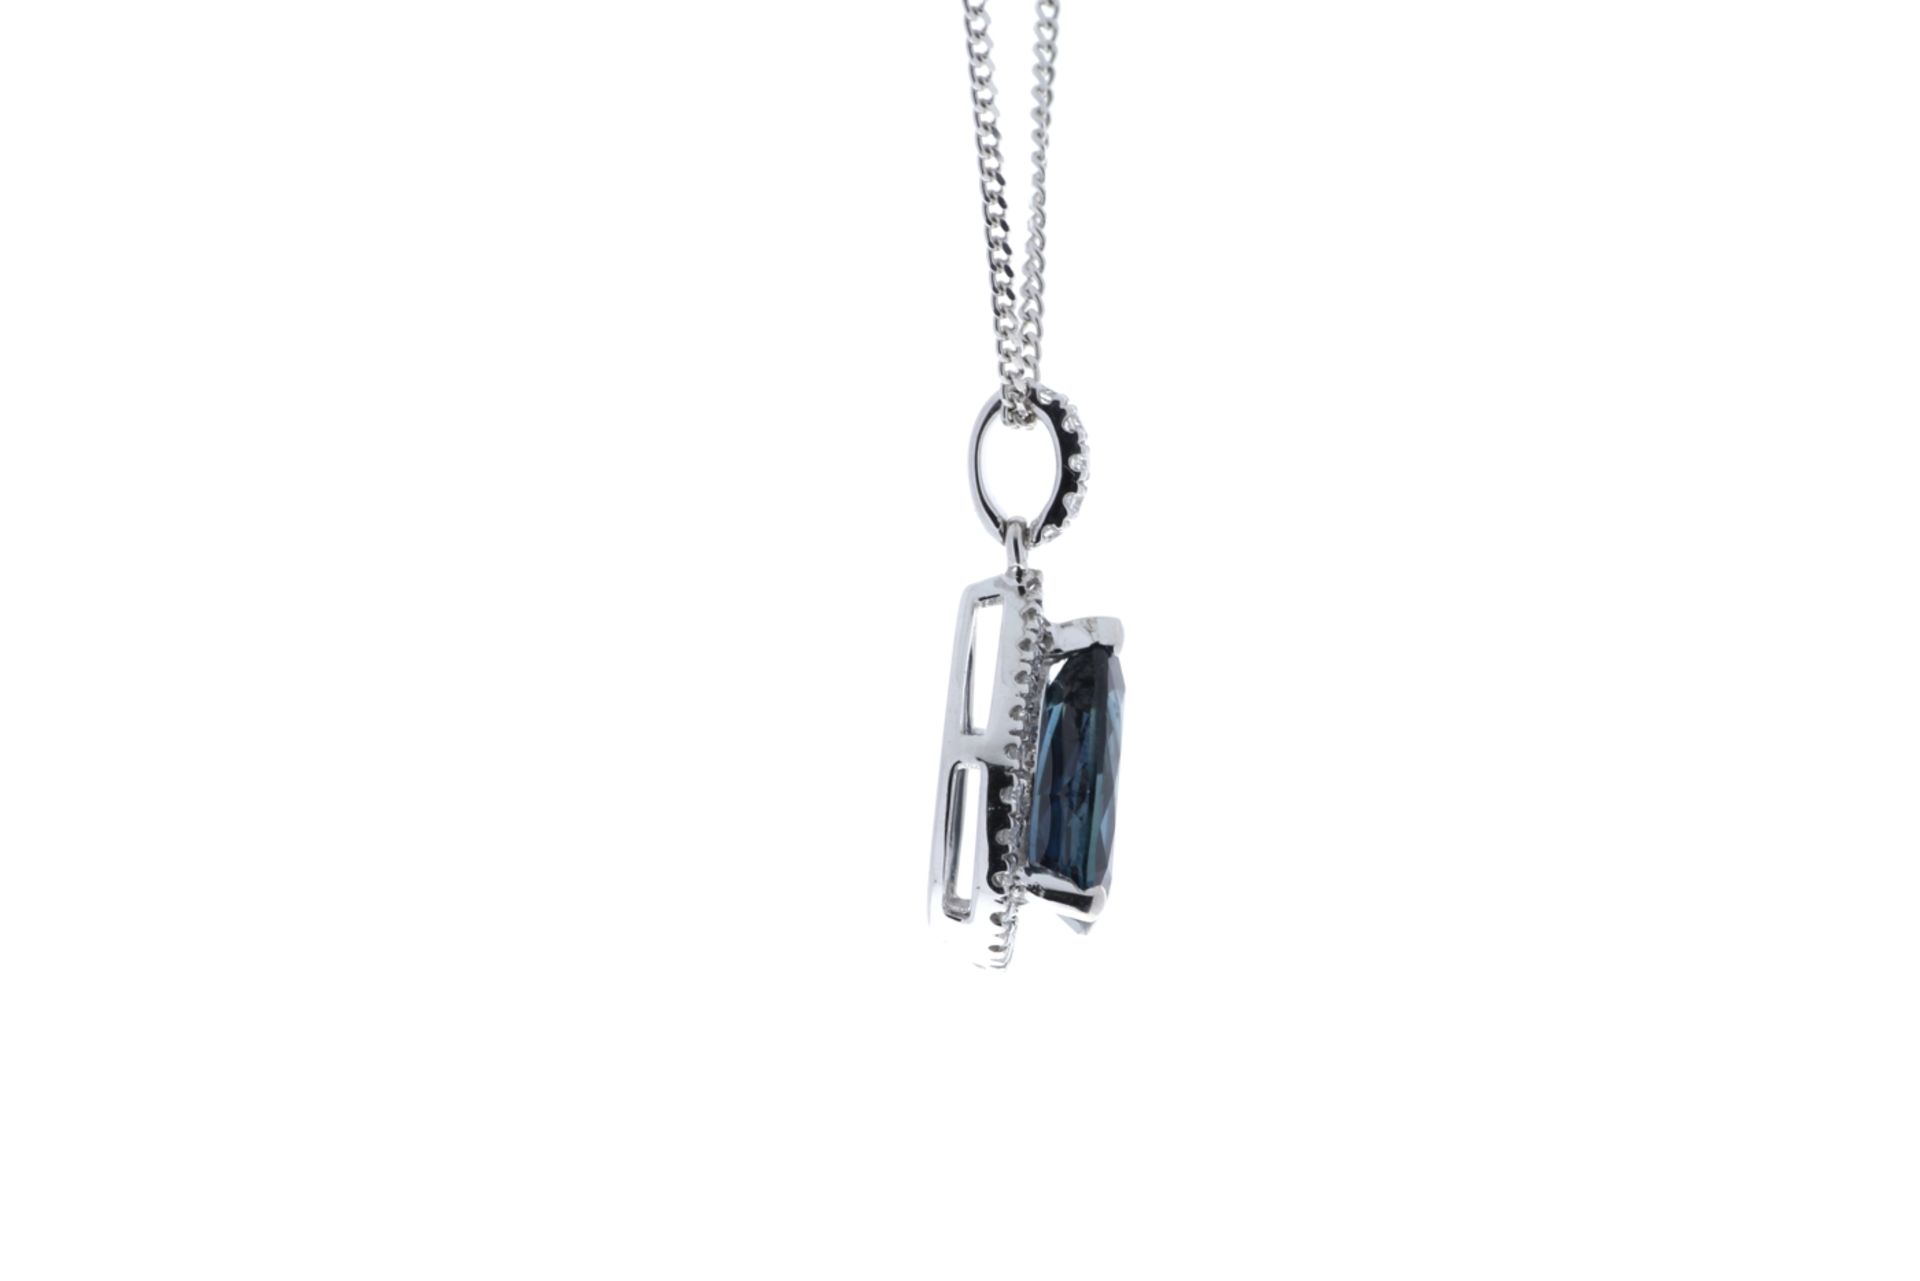 18ct White Gold Diamond And Sapphire Pendant 2.35 Carats - Image 2 of 4